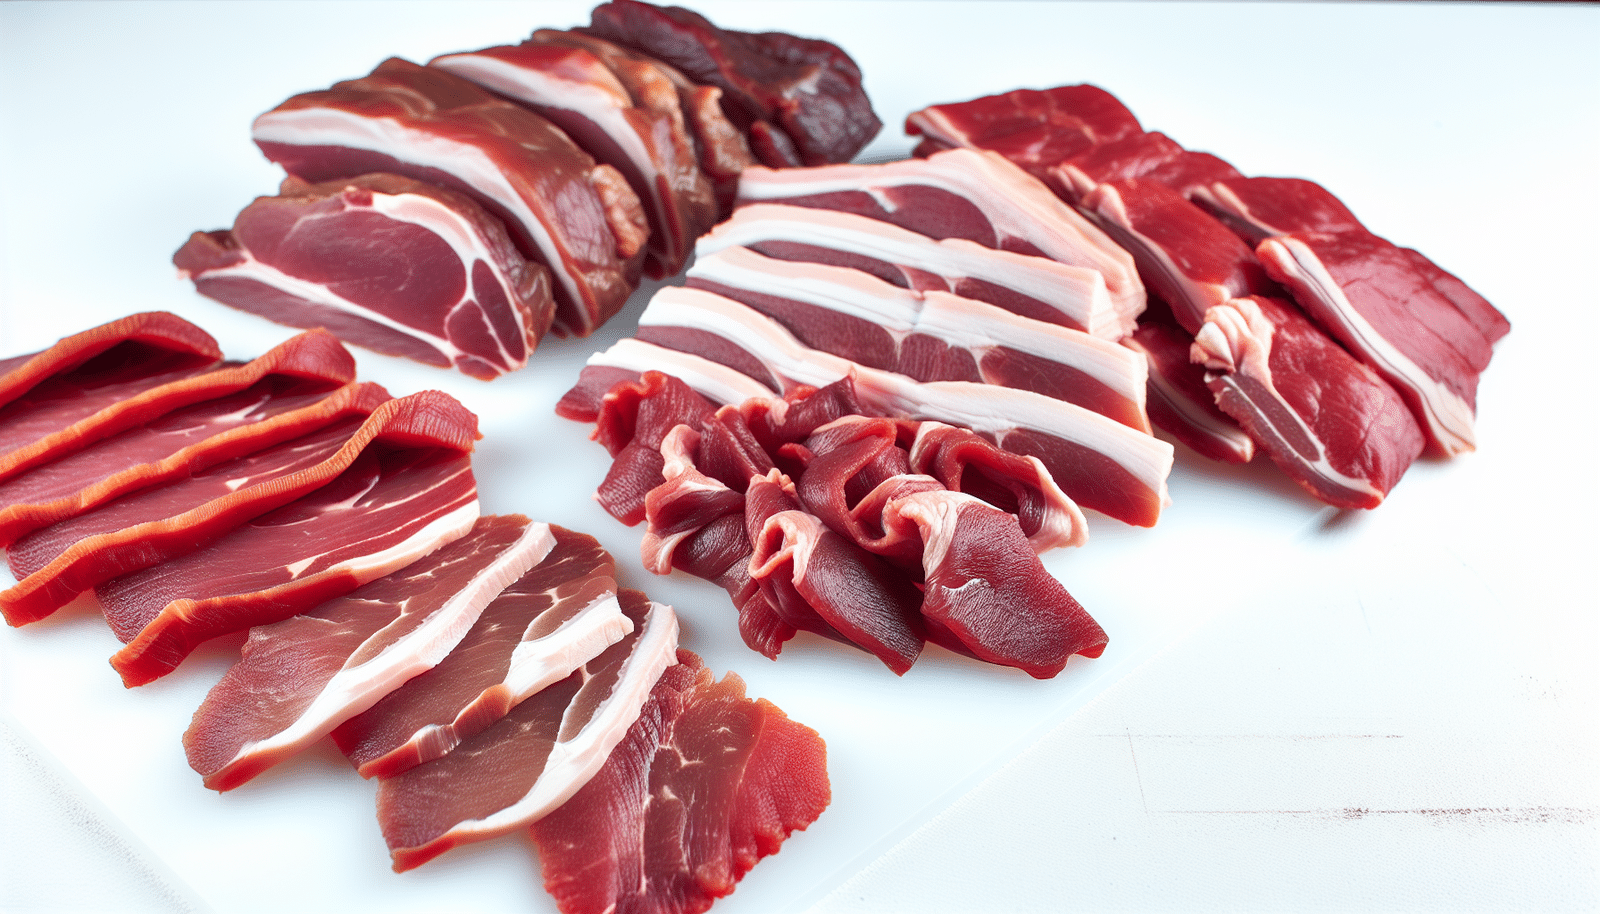 Various cuts of lean meat for jerky